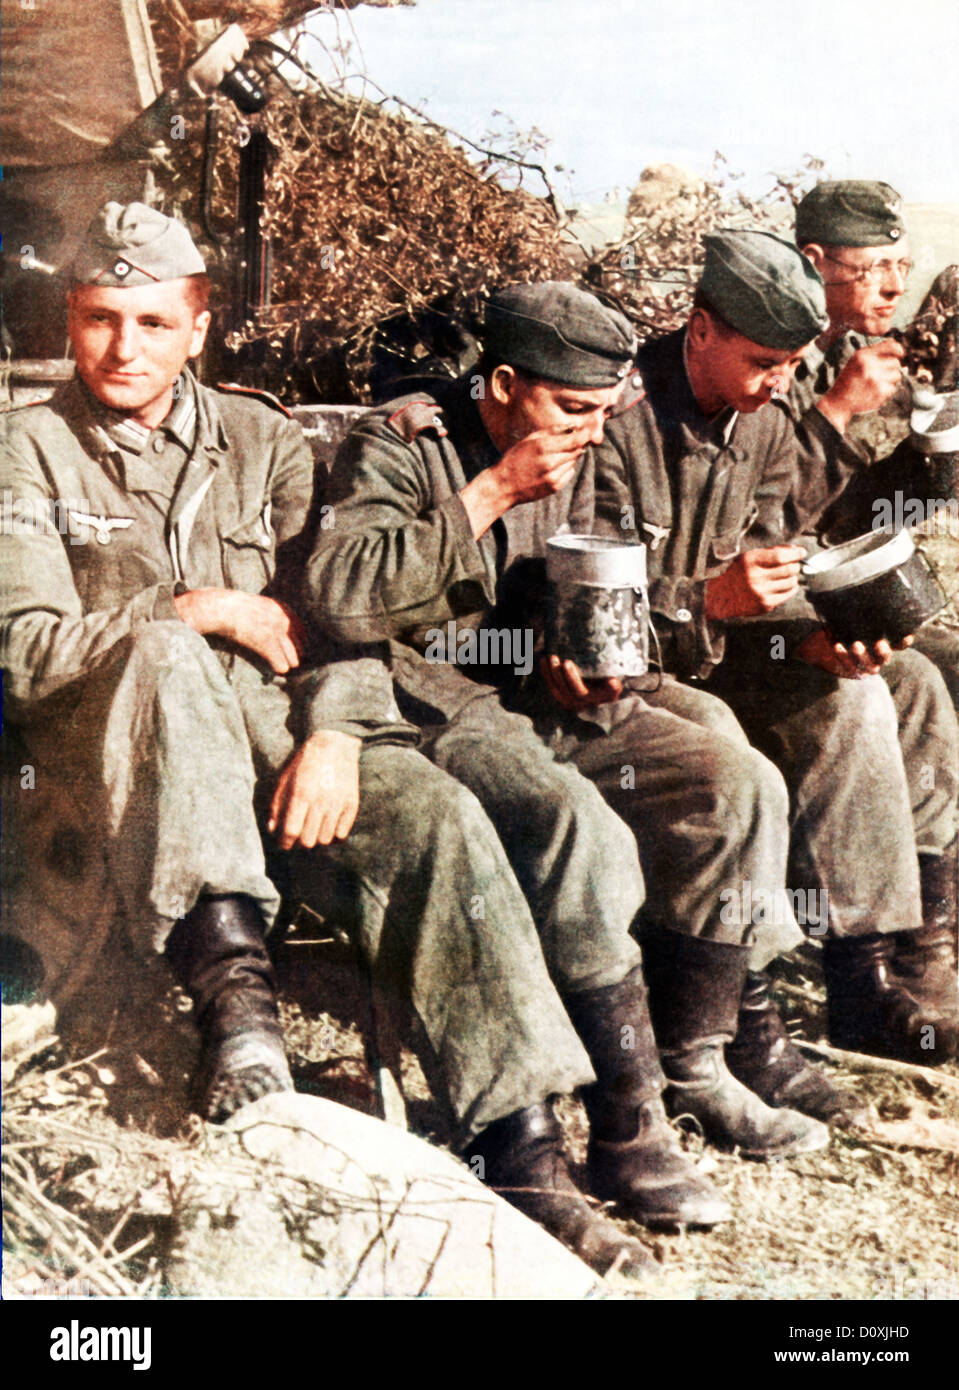 Operation, Barbarossa, group, Wehrmacht, soldiers, lunch, boxes, USSR, World War II, Soviet Union, 1942, army Stock Photo